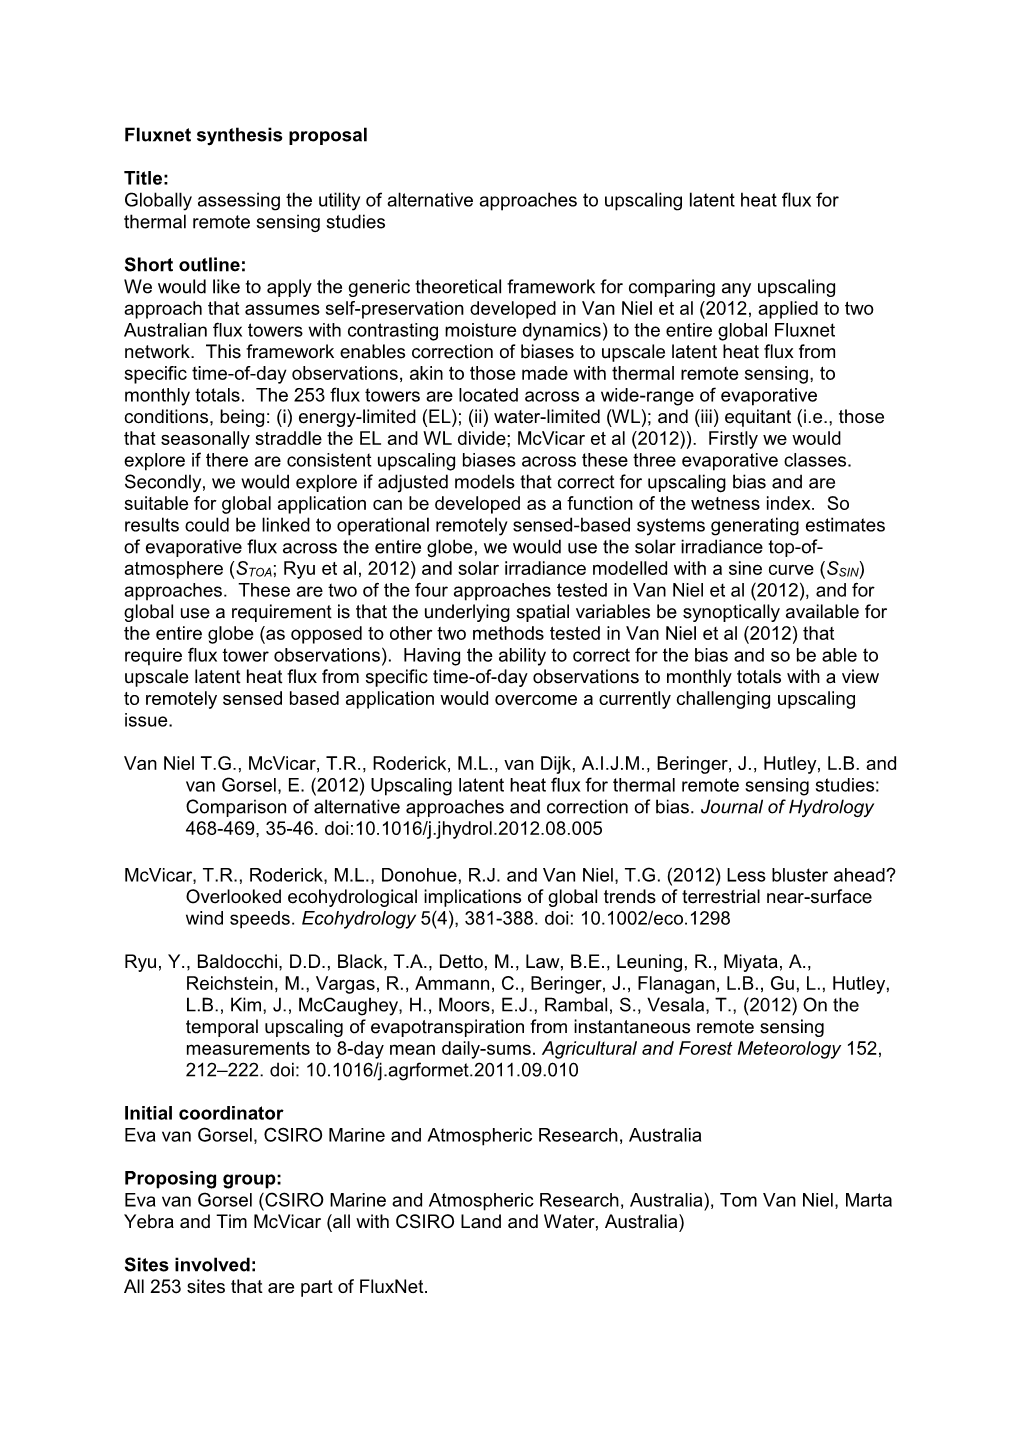 Fluxnet Synthesis Proposal Title: Globally Assessing the Utility of Alternative Approaches to Upscaling Latent Heat Flux For